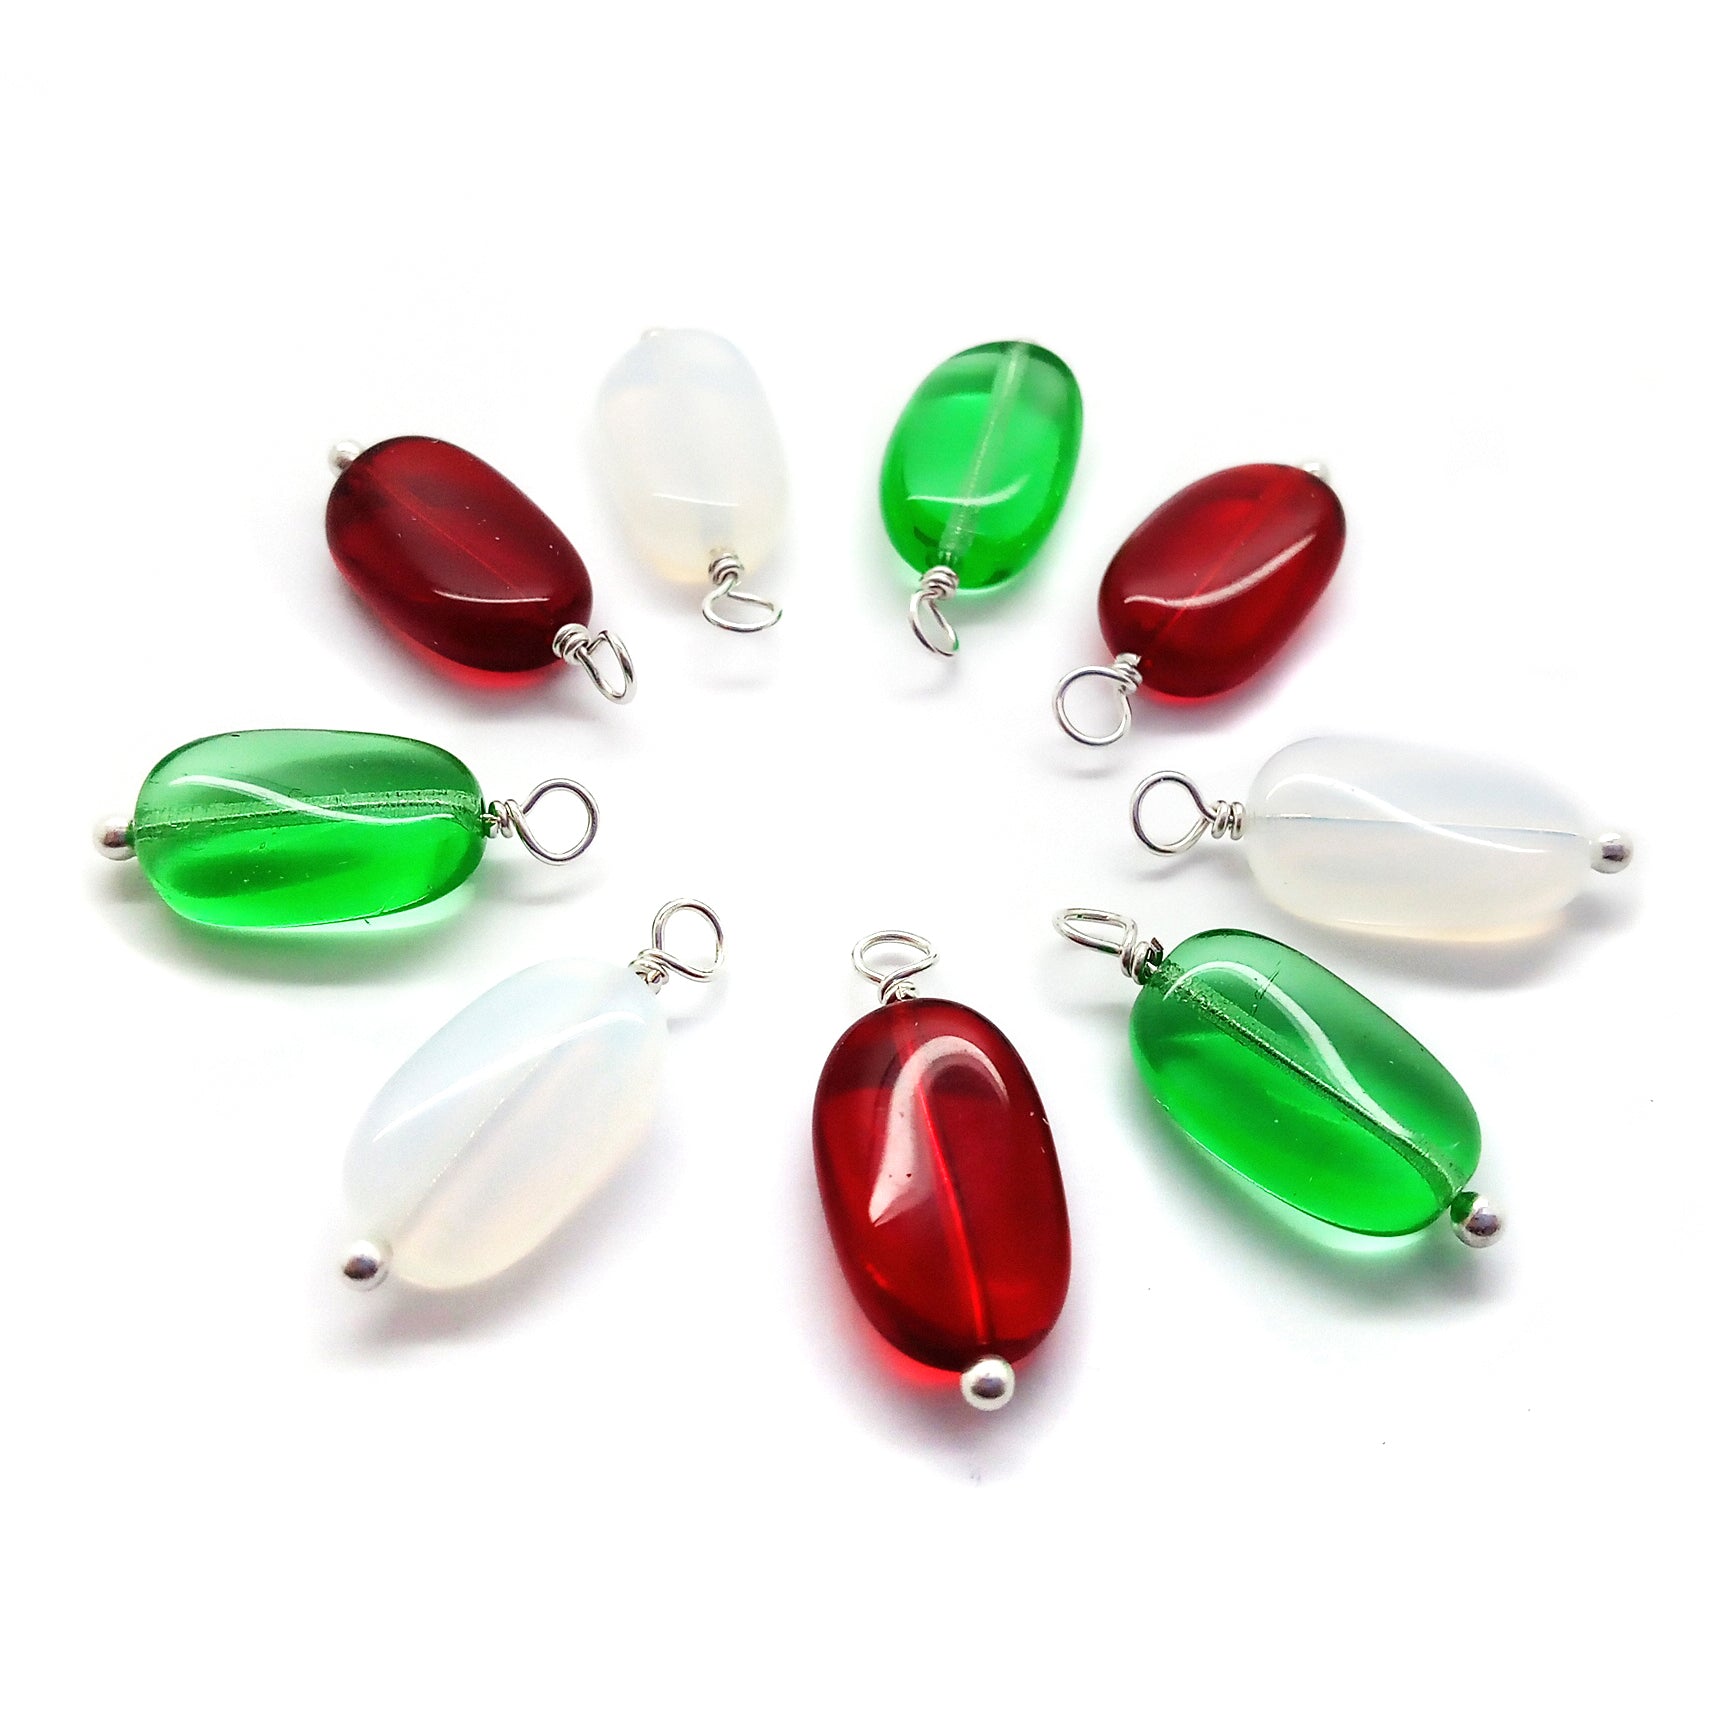 Pretty 15mm glass beads in red, green and white made into bead dangle charms in Christmas colors.